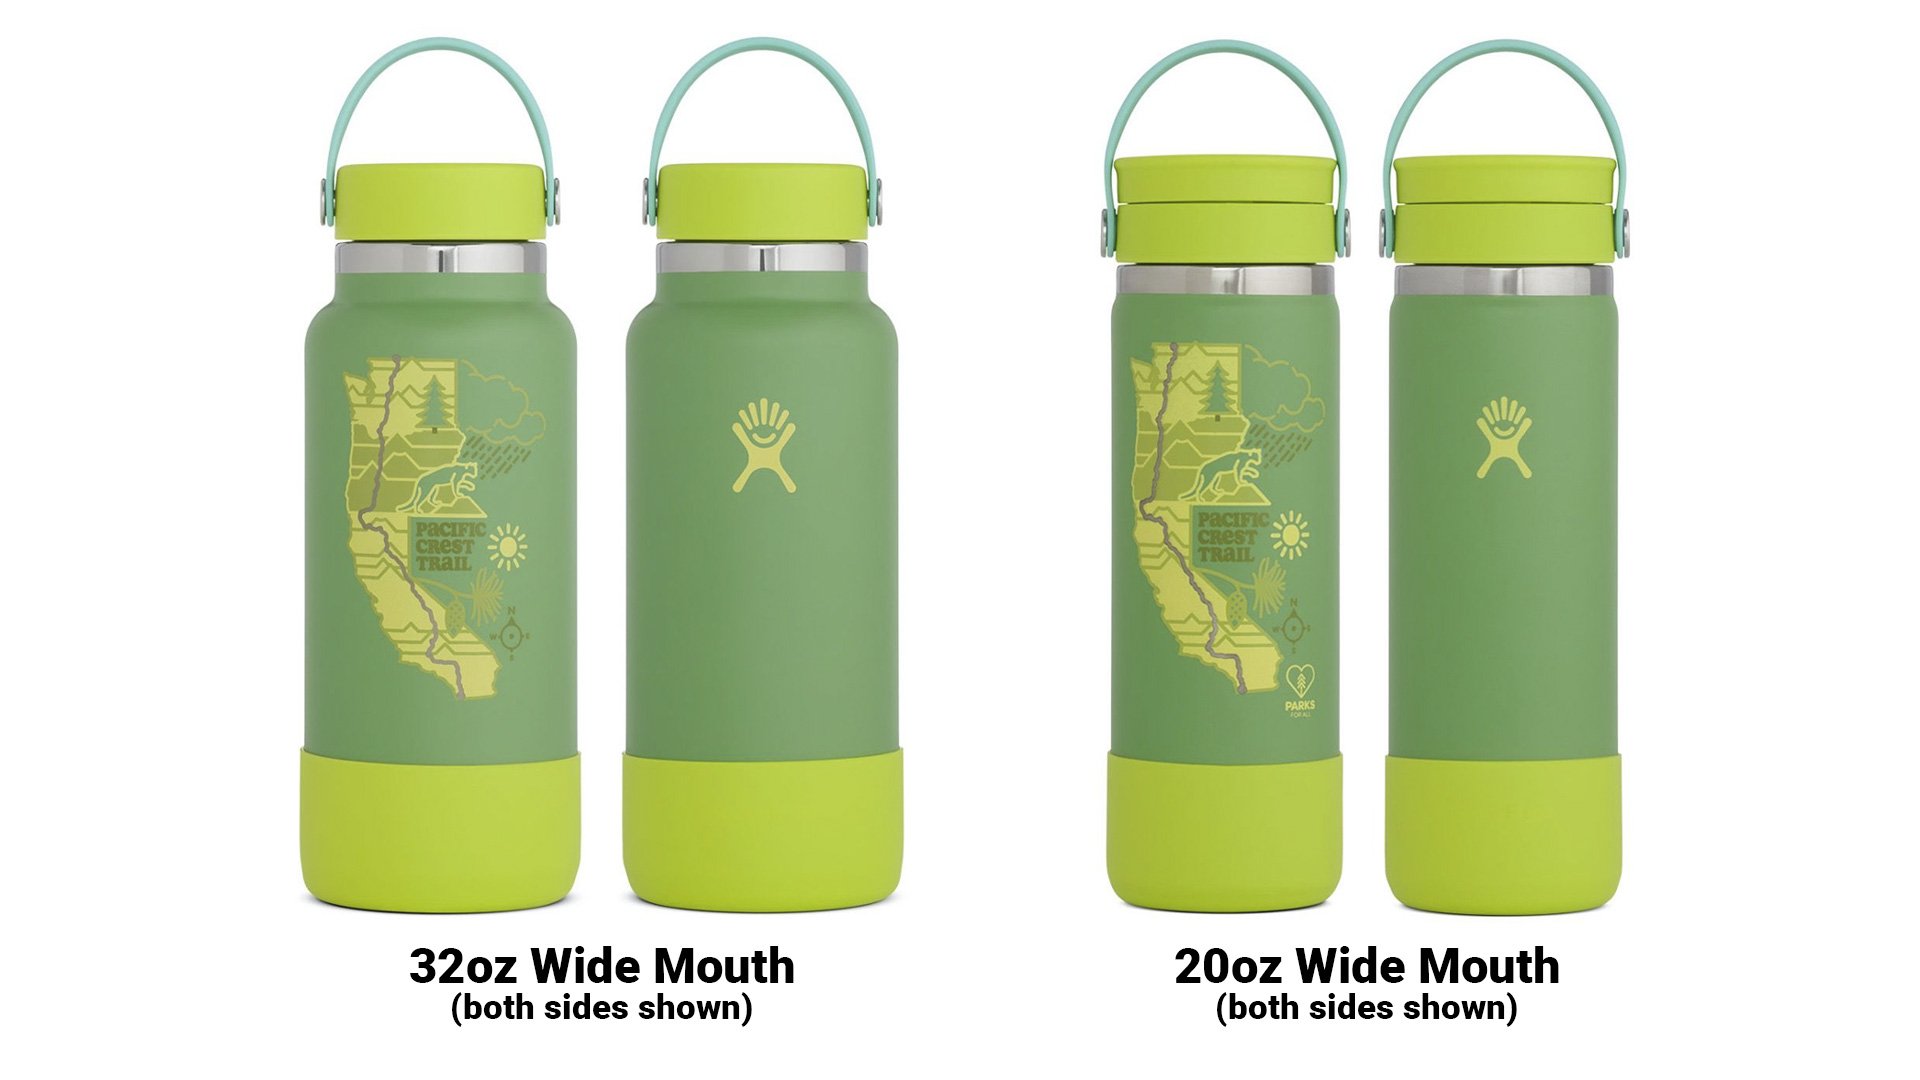 Hydro Flask Launches Limited Edition Scenic Trails Bottles - Pacific Crest  Trail Association